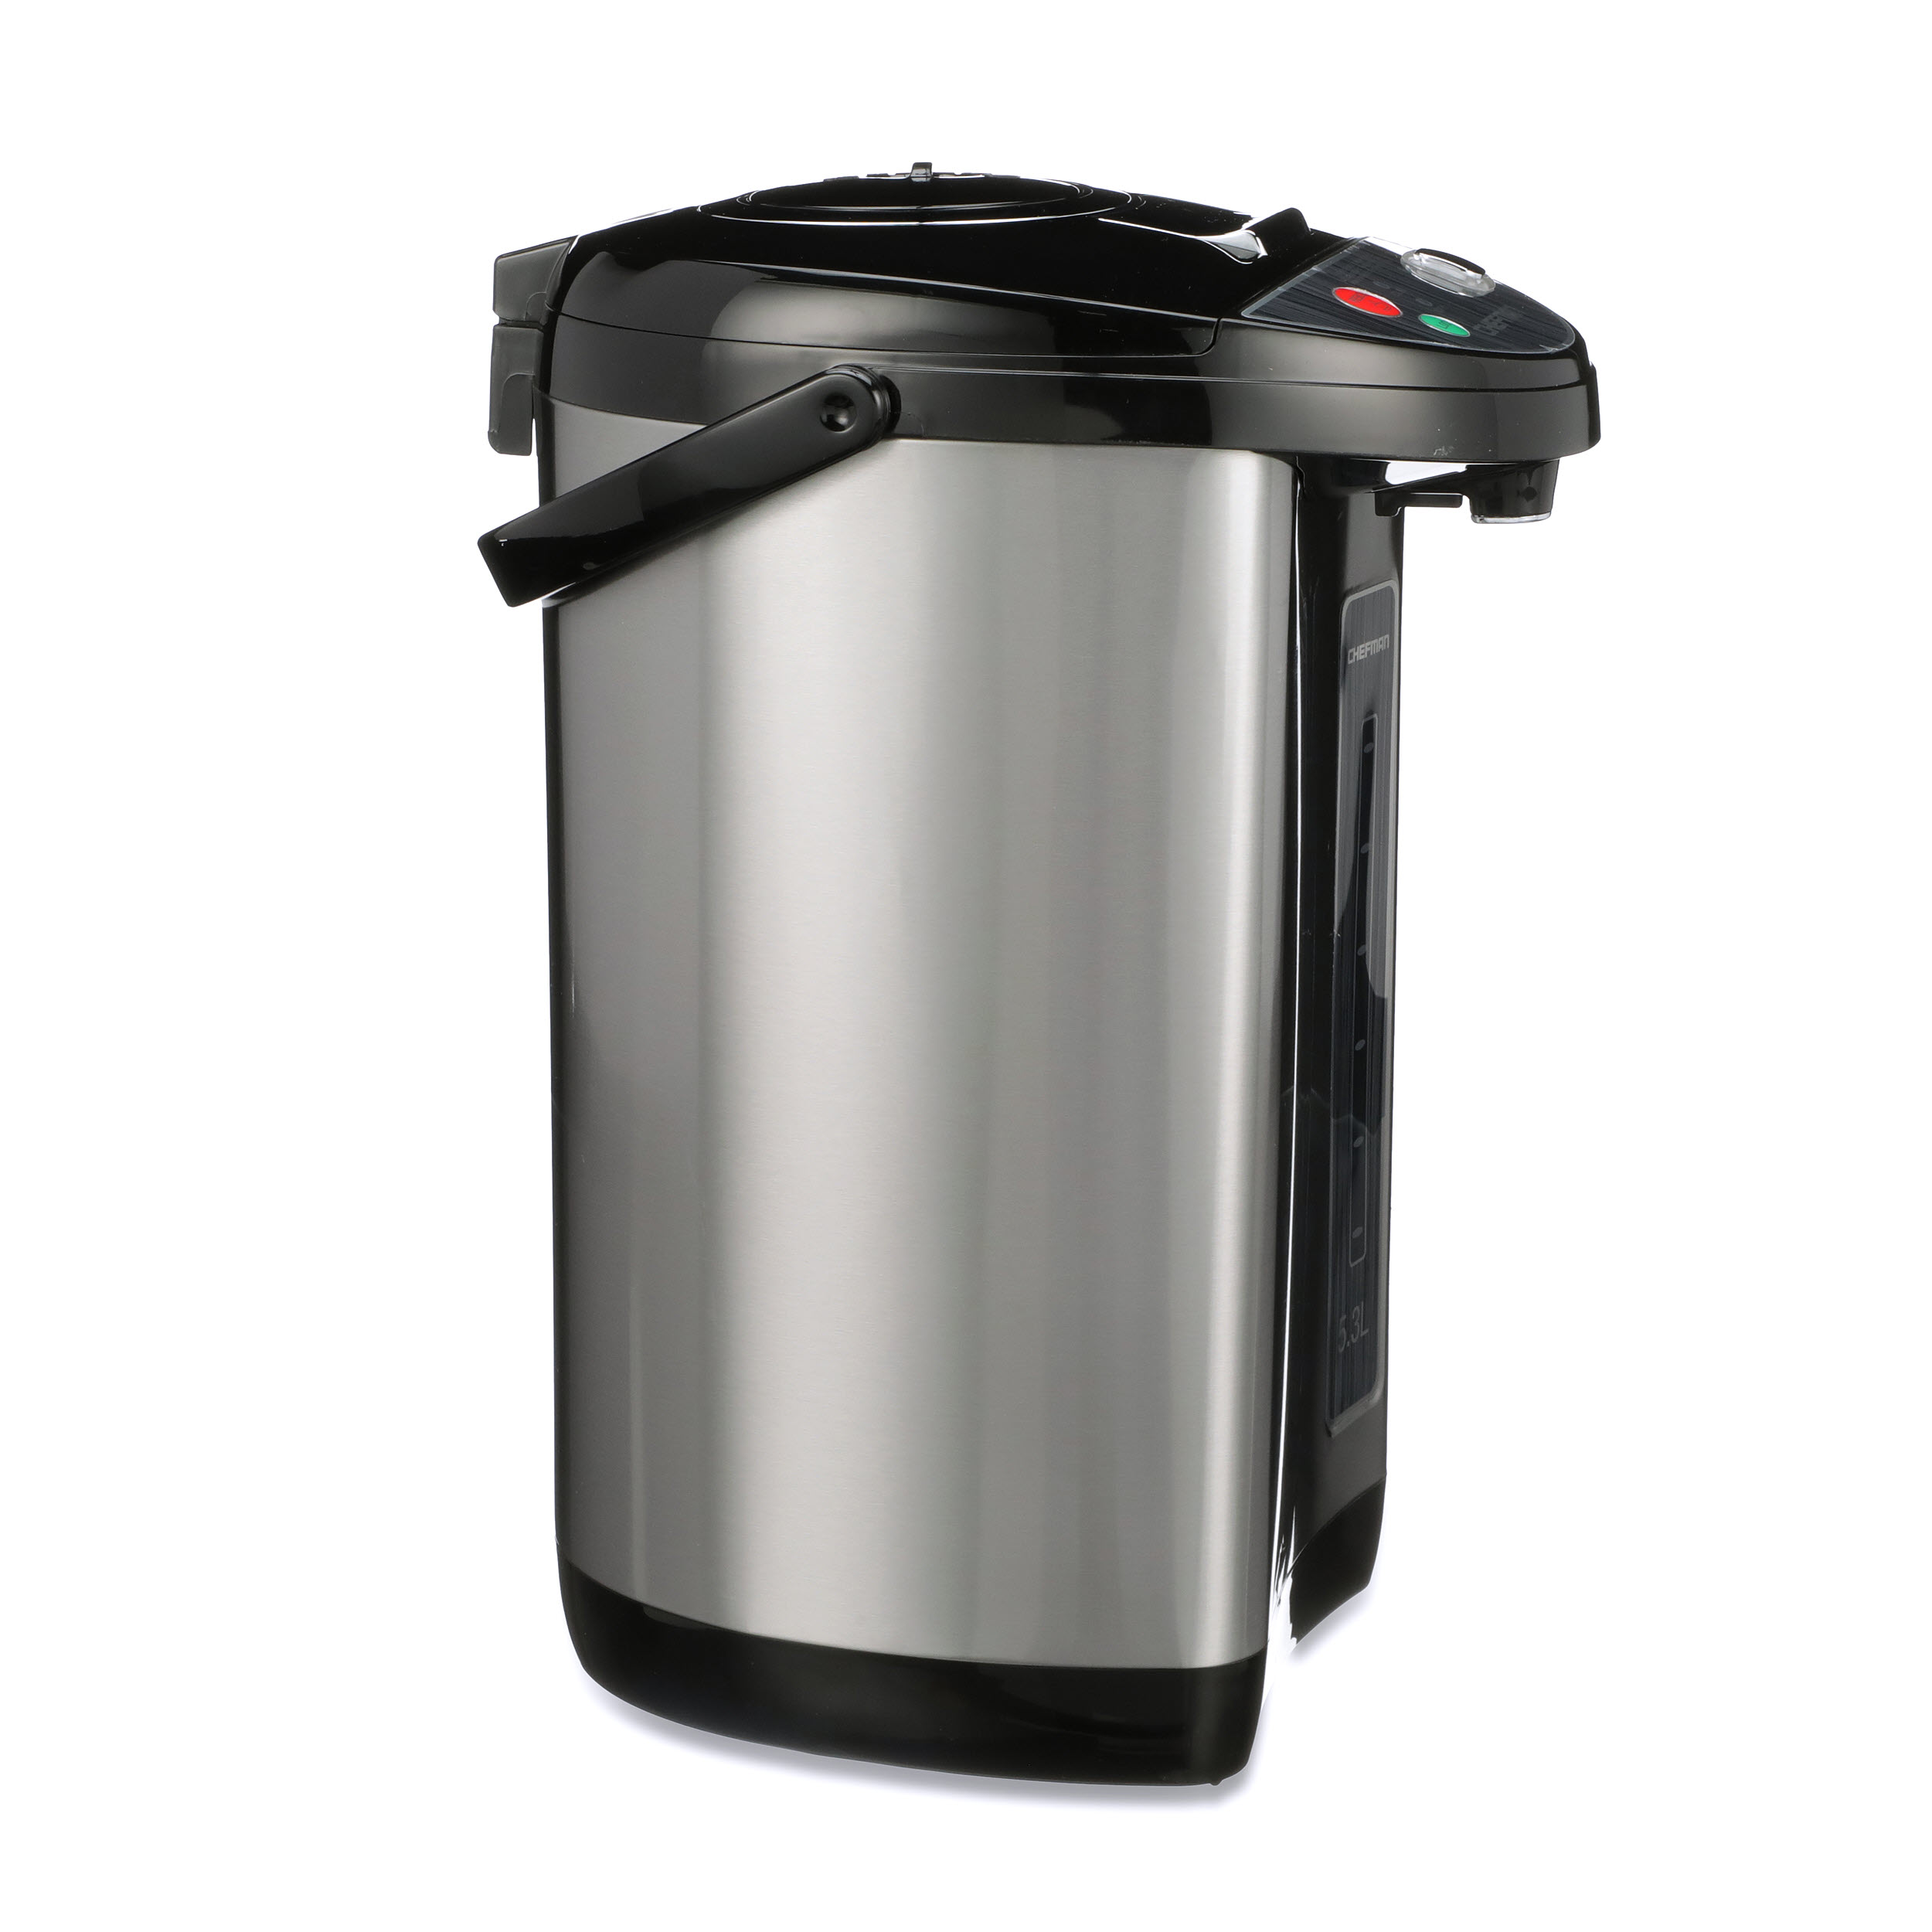 Chefman Instant Electric Hot Water Pot - Stainless Steel - RJ16-LOCK